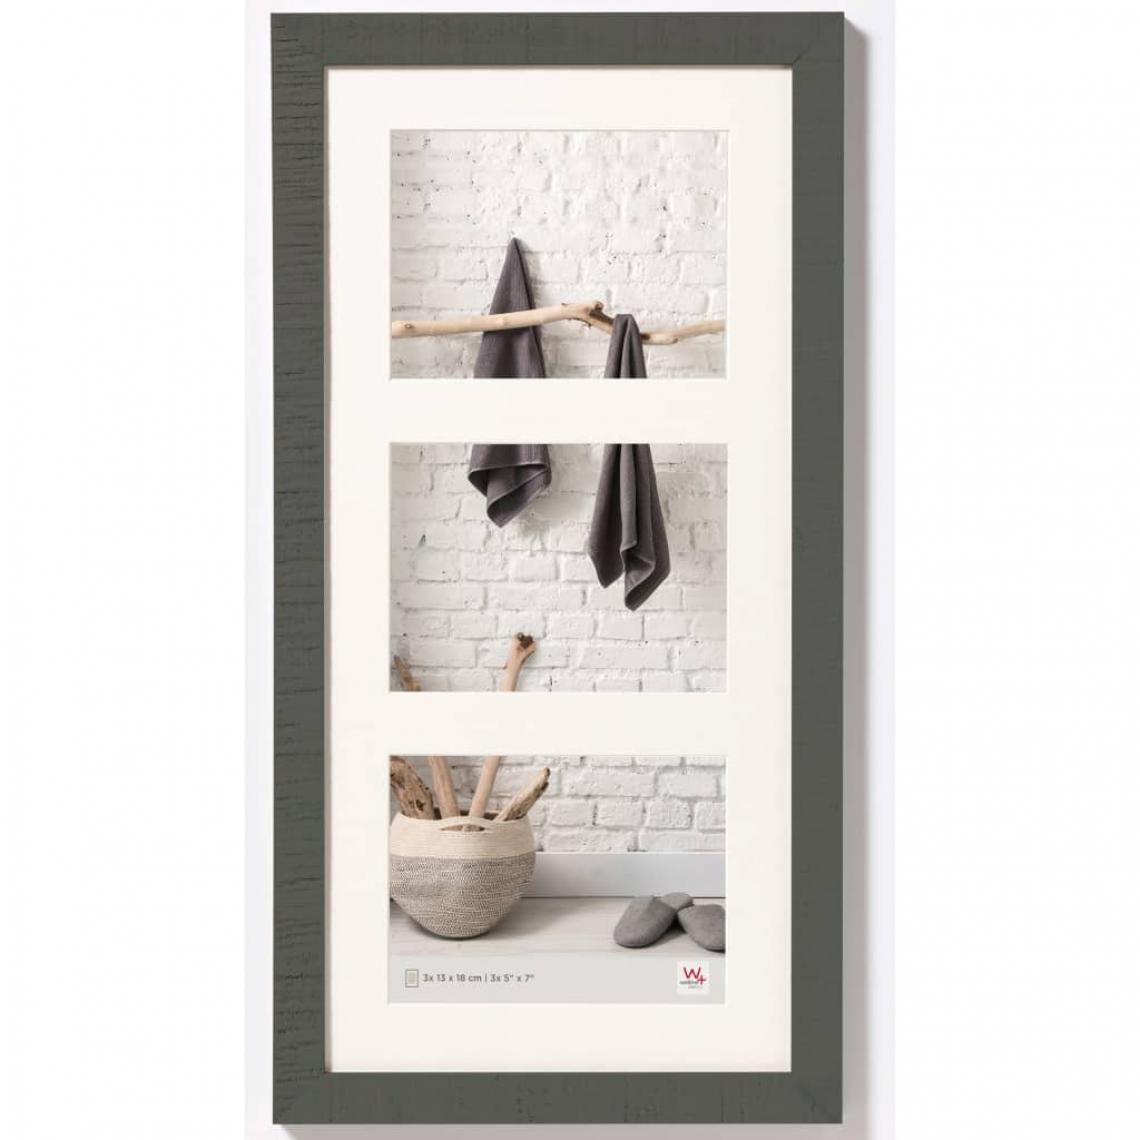 Walther - Walther Design Cadre photo Home 3x13x18 cm Gris - Cadres, pêle-mêle